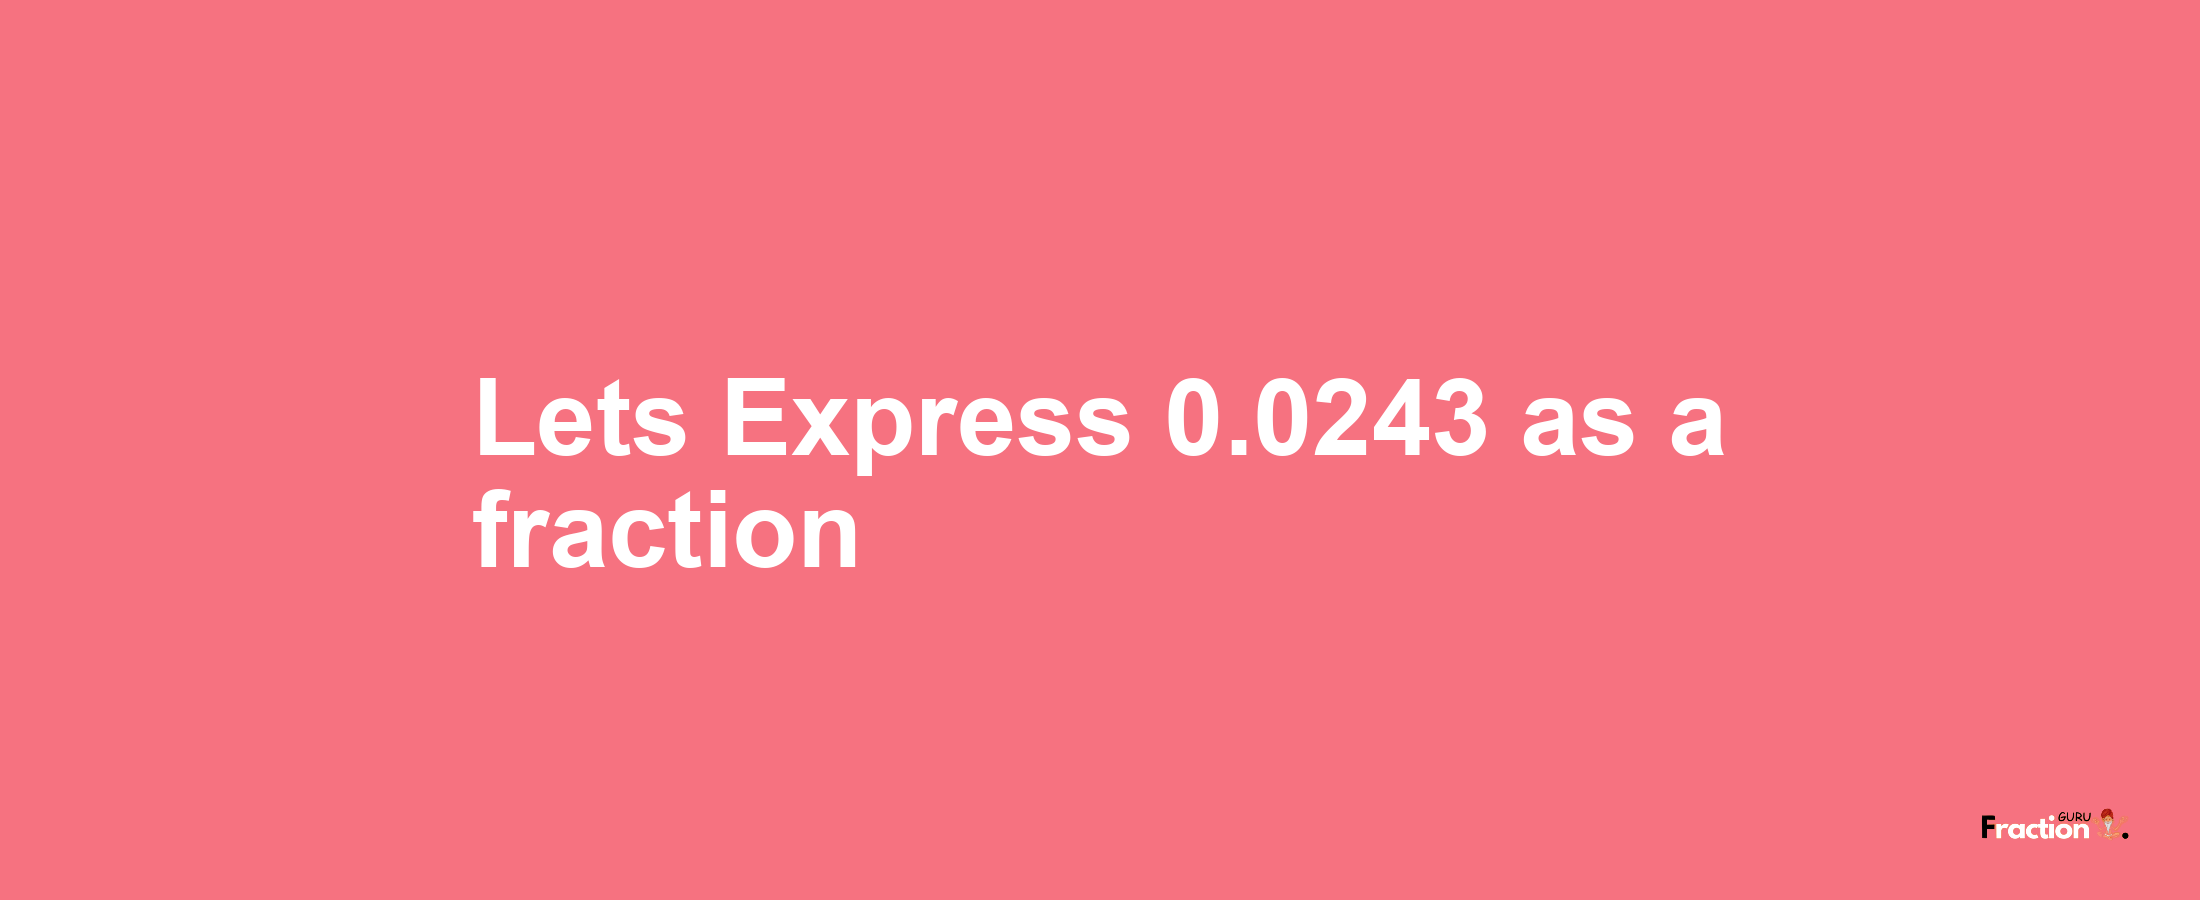 Lets Express 0.0243 as afraction